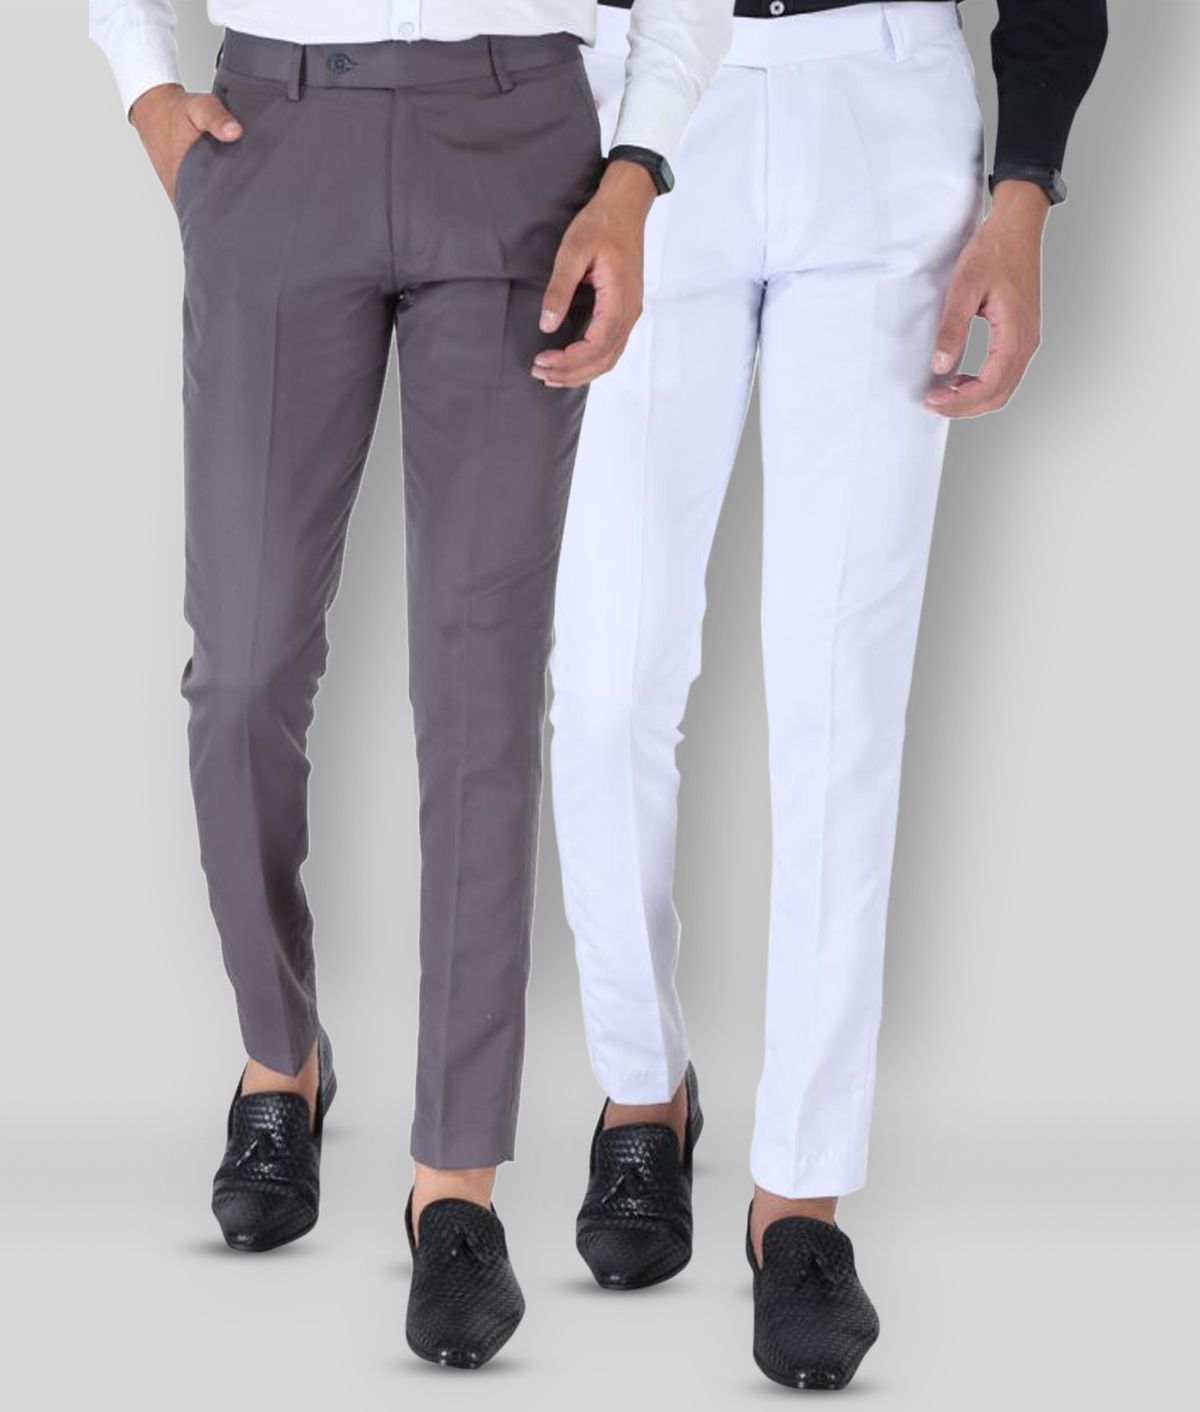     			SREY - Grey Polycotton Slim - Fit Men's Chinos ( Pack of 2 )